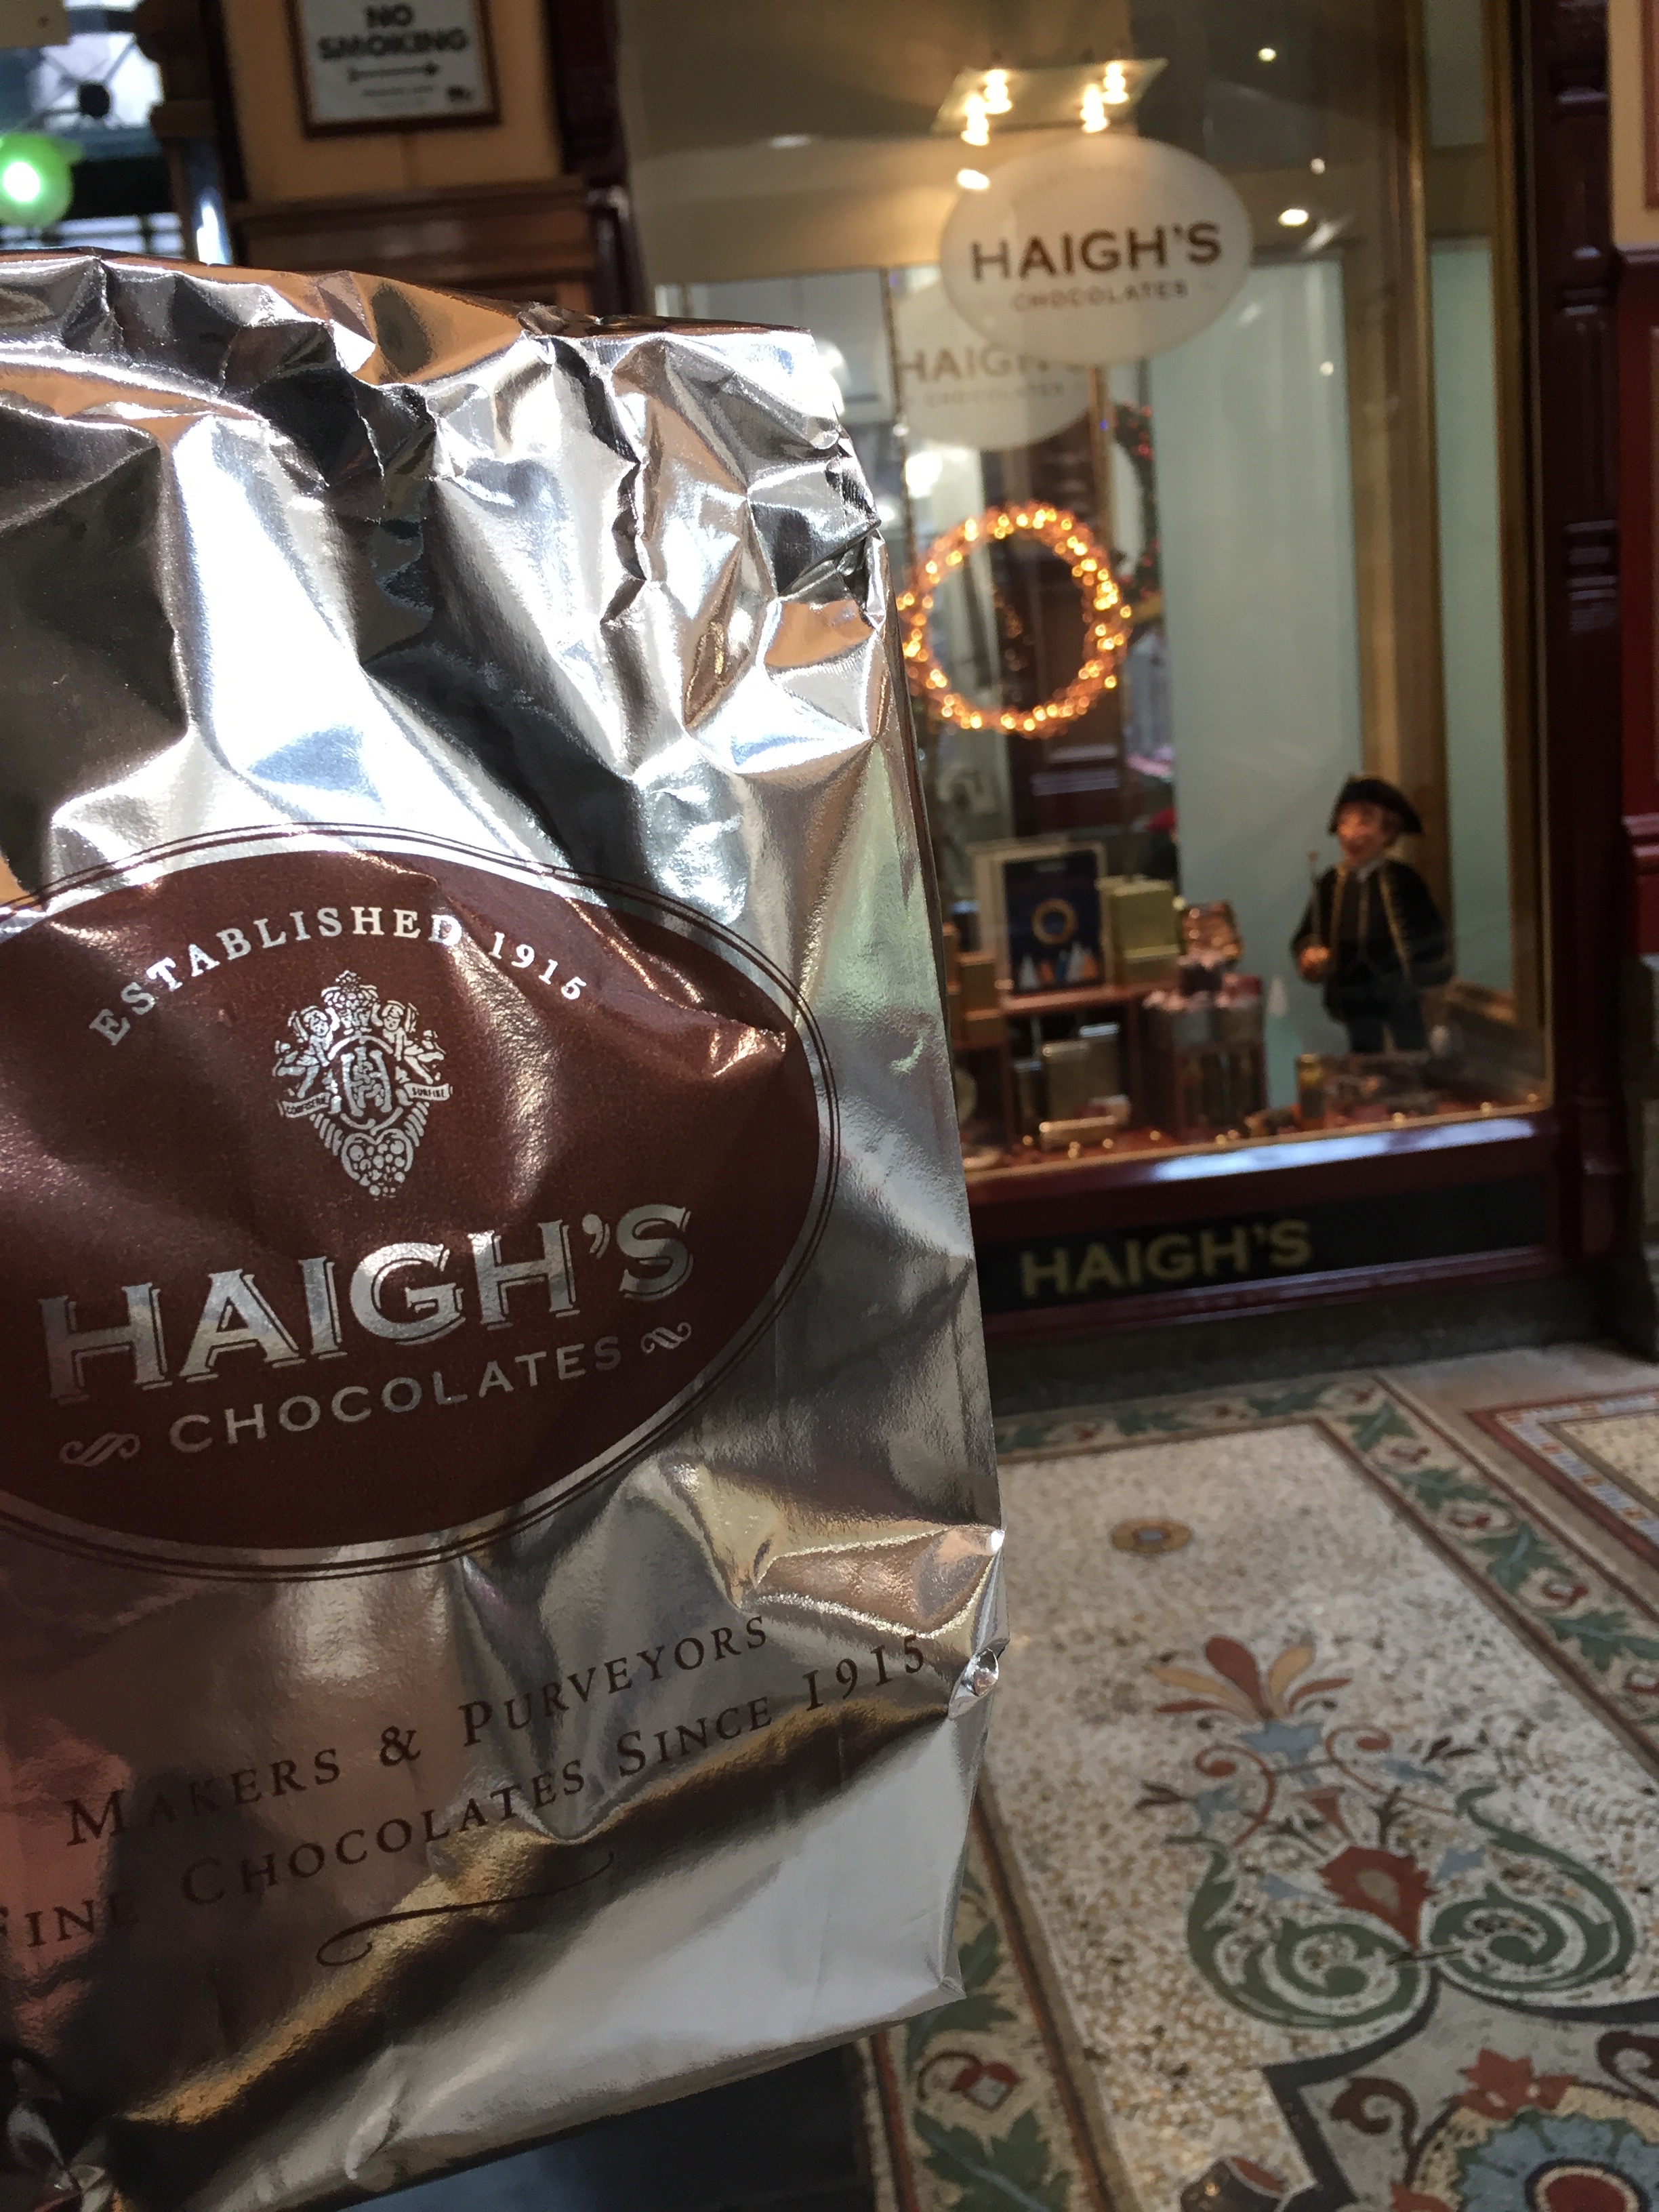 Foil bag for chocolates outside the Haigh's Chocolates store in Melbourne